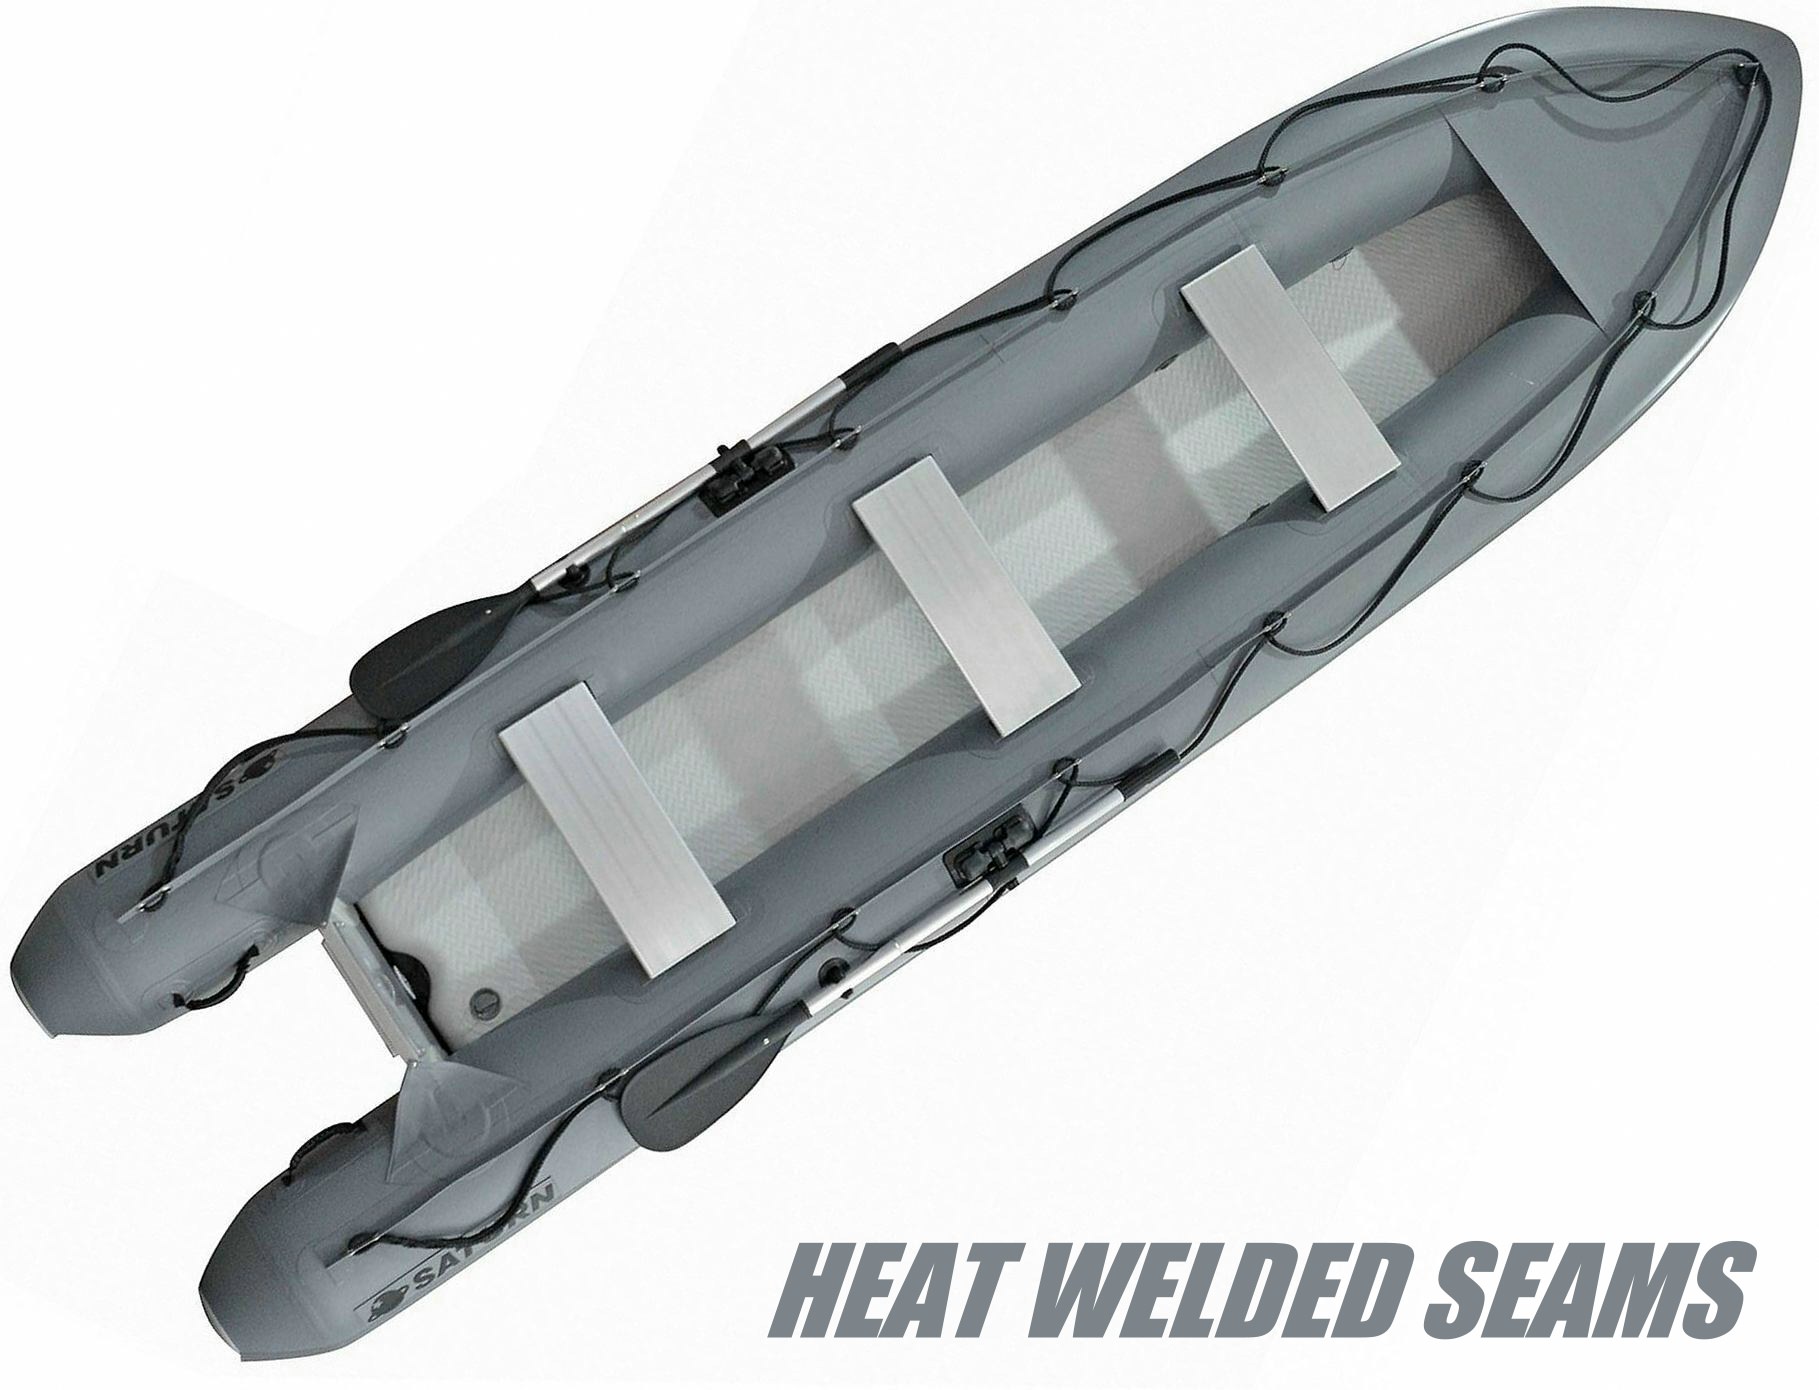 14' Inflatable Kayak + Inflatable Boat Crossover with heat welded